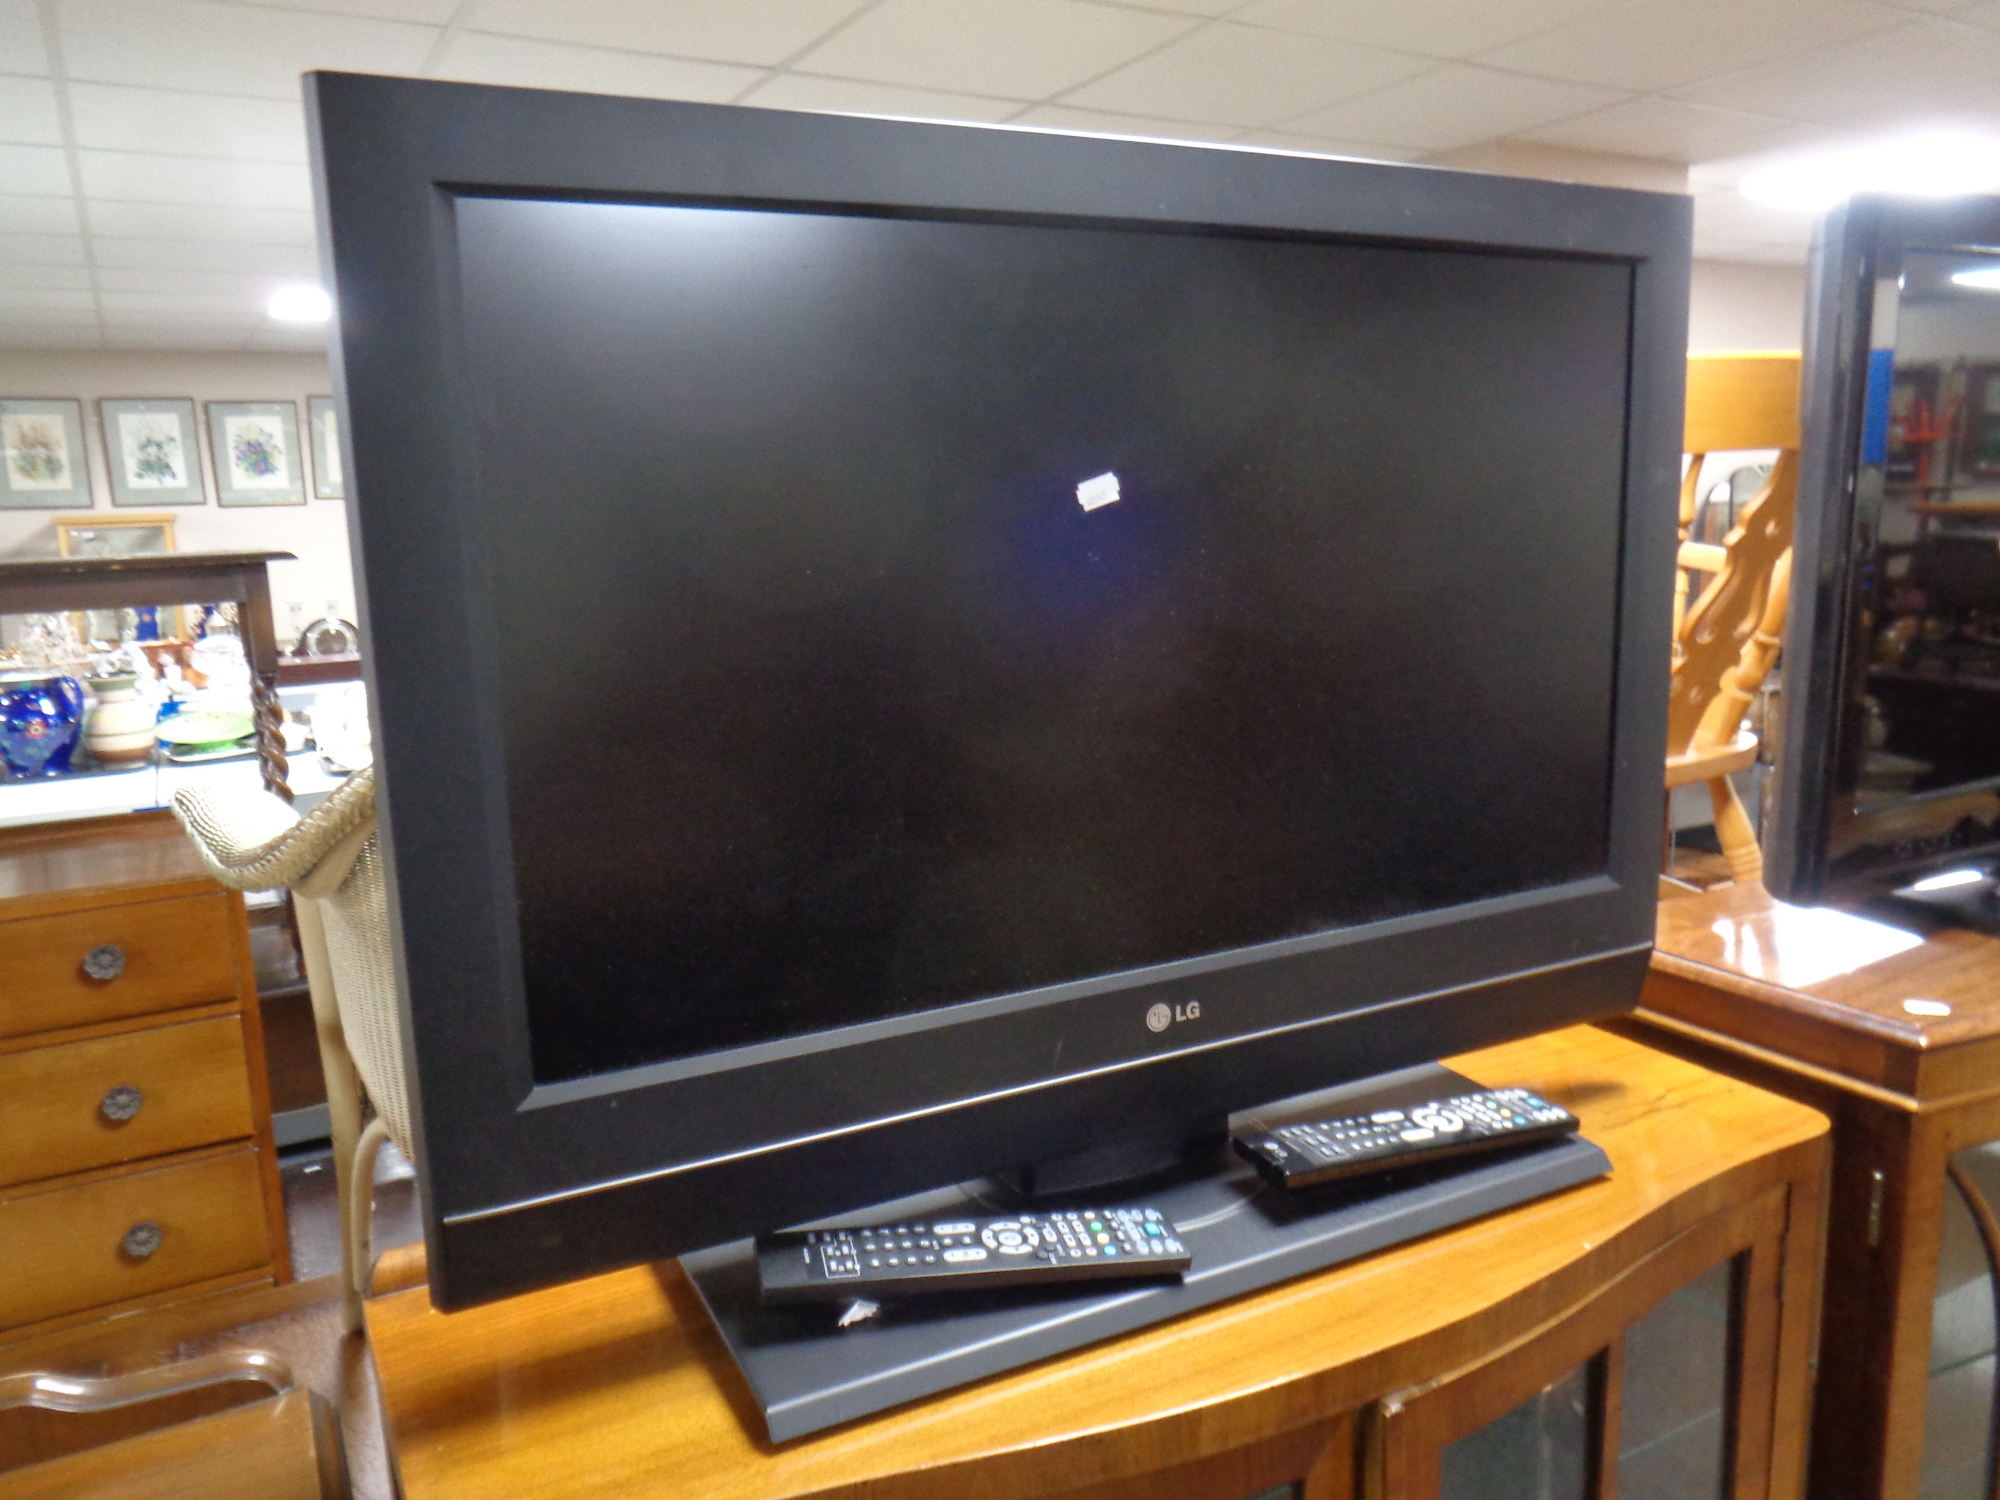 An LG 32'' LCD TV with two remotes